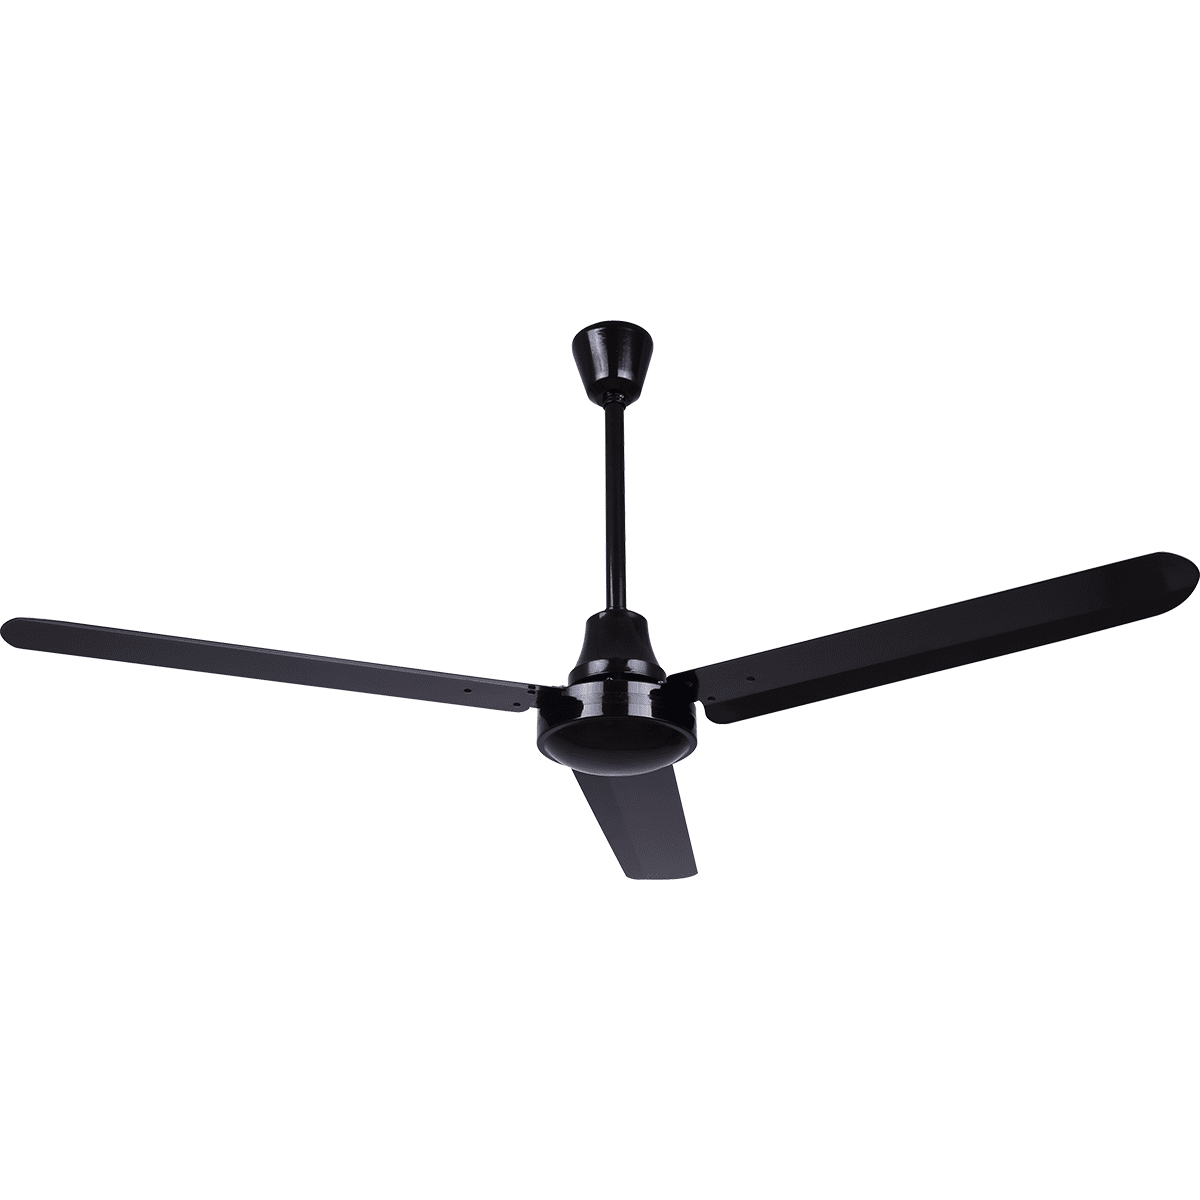 Canarm High Performance Weather Proof DC Industrial Fan - 60-in Black